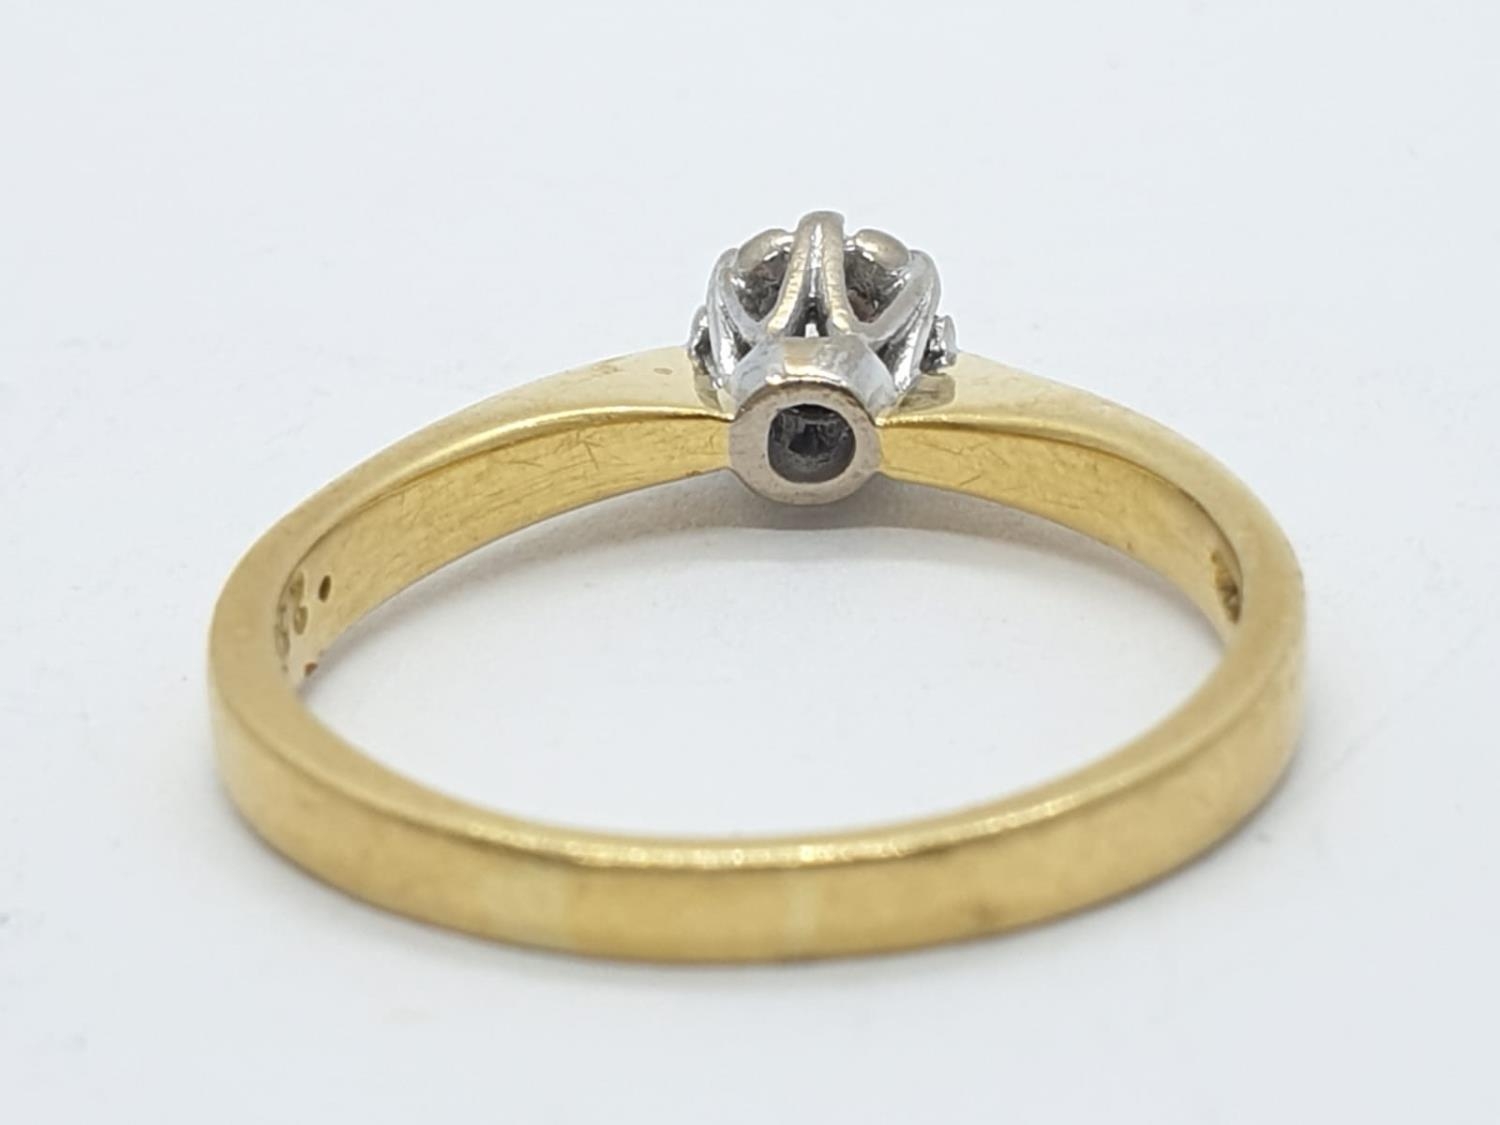 18ct diamond ring with 0.25ct diamond, weight 3.5g, size N - Image 3 of 5